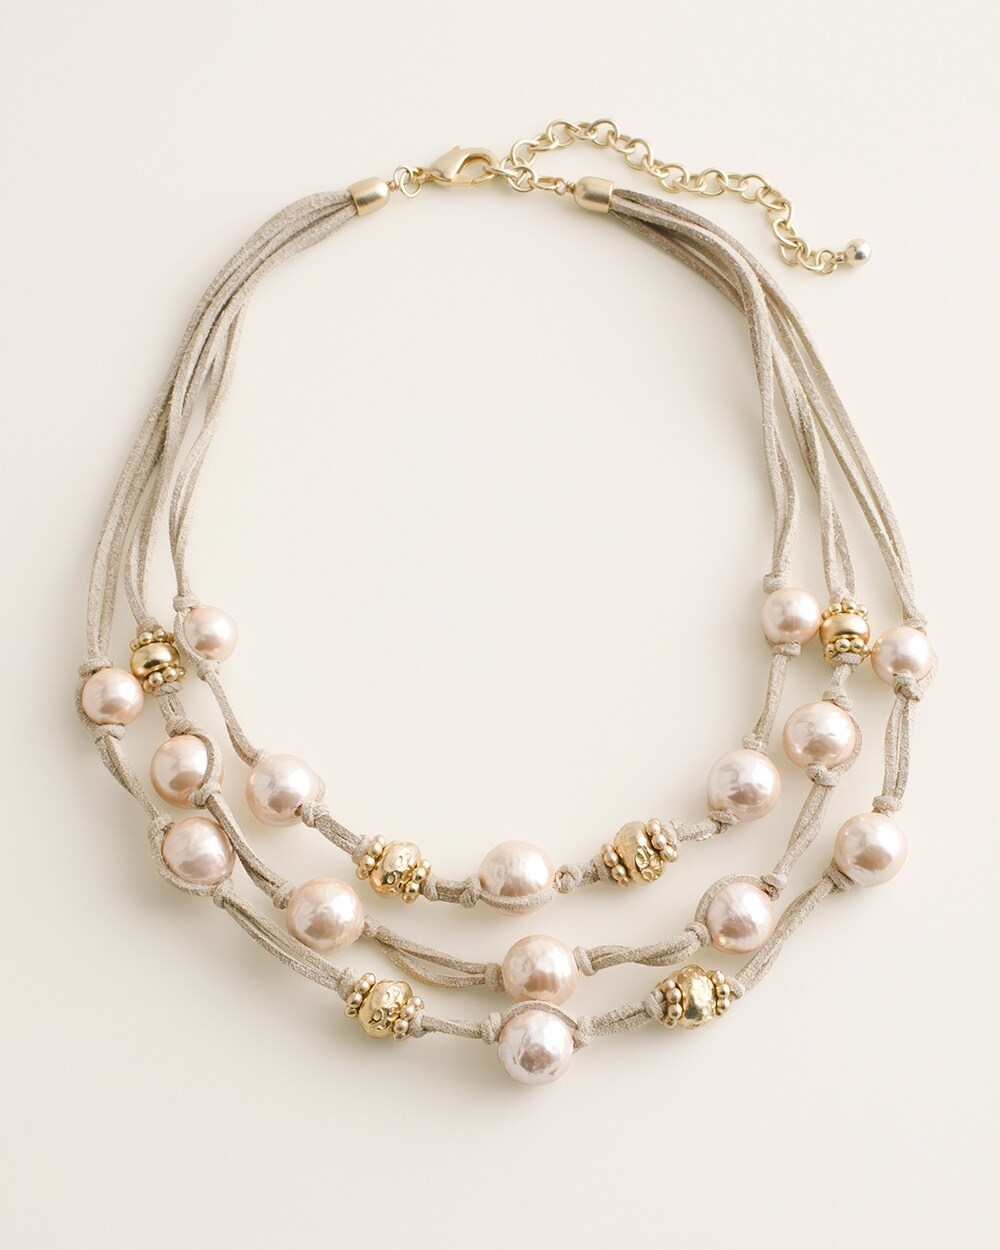 Pink and Goldtone Illusion Necklace